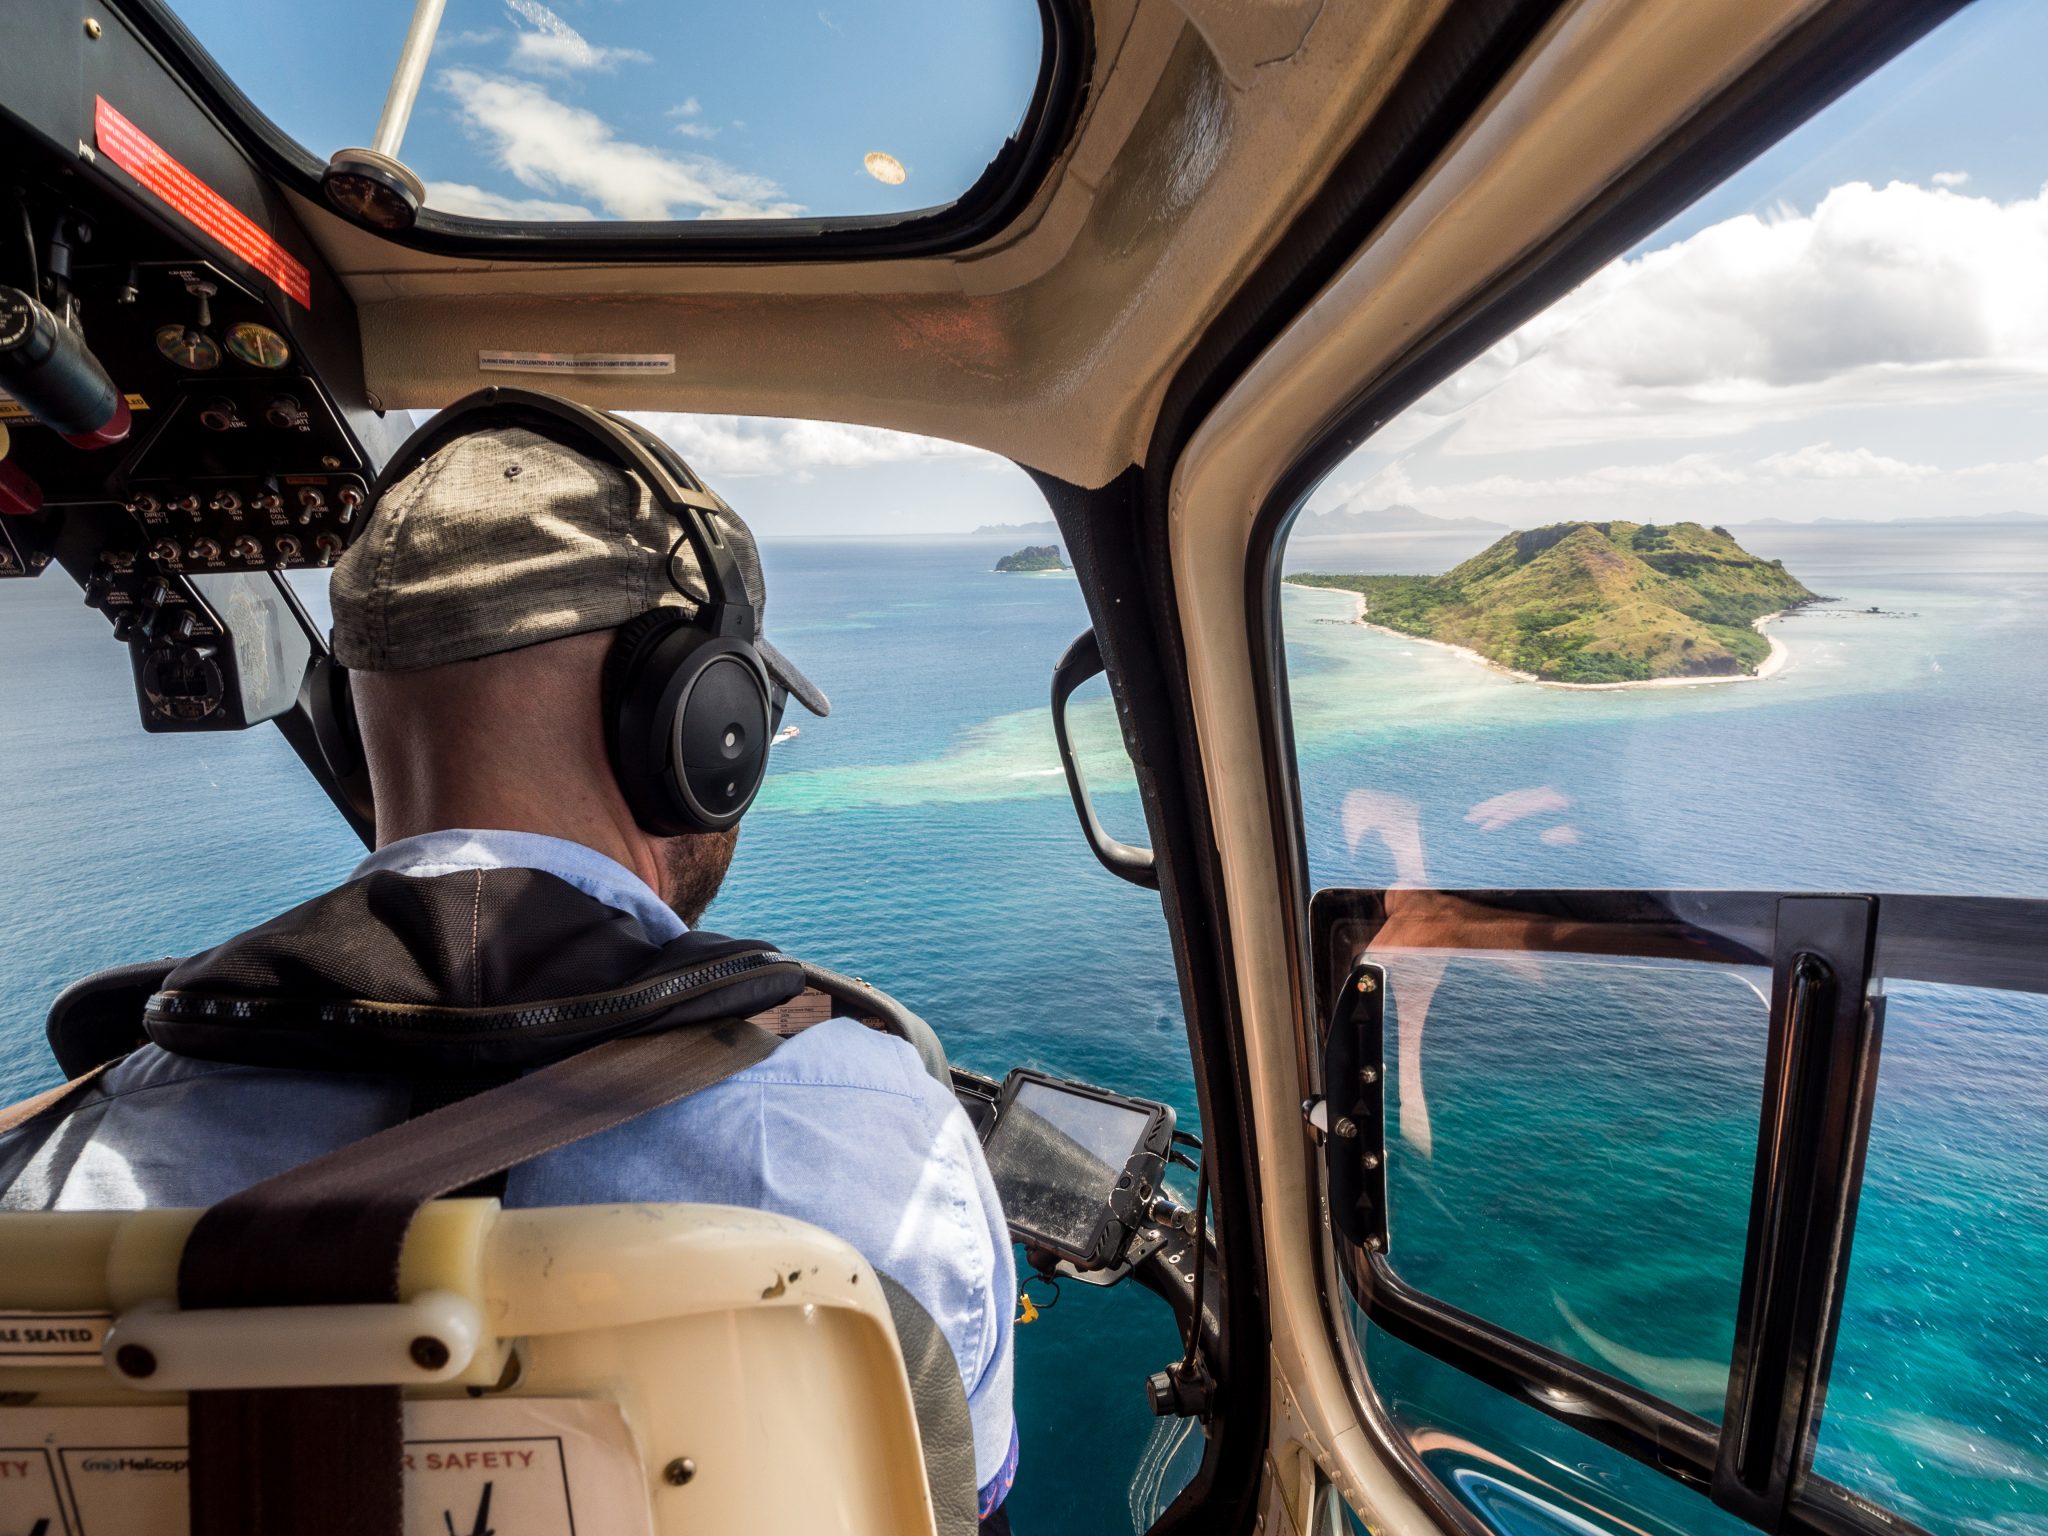 Aerial Landscape View from Inside Helicopter Looking Across Tropical South Pacific Island and Ocean Reef in Fiji